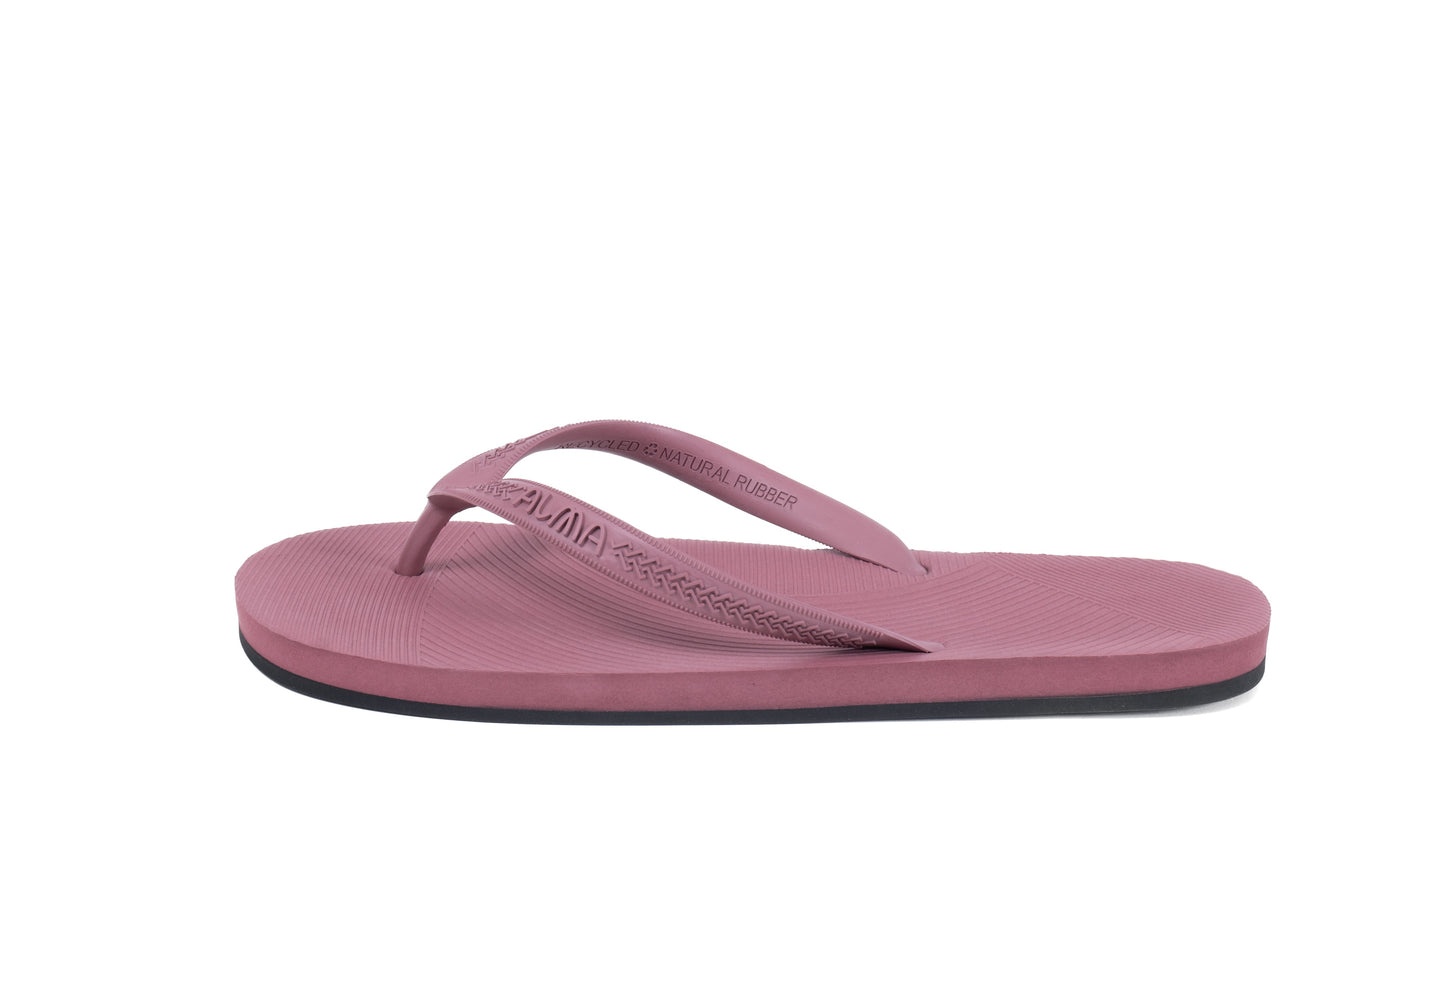 Men's Recycled Tire Sole Flip Flop - Ruby